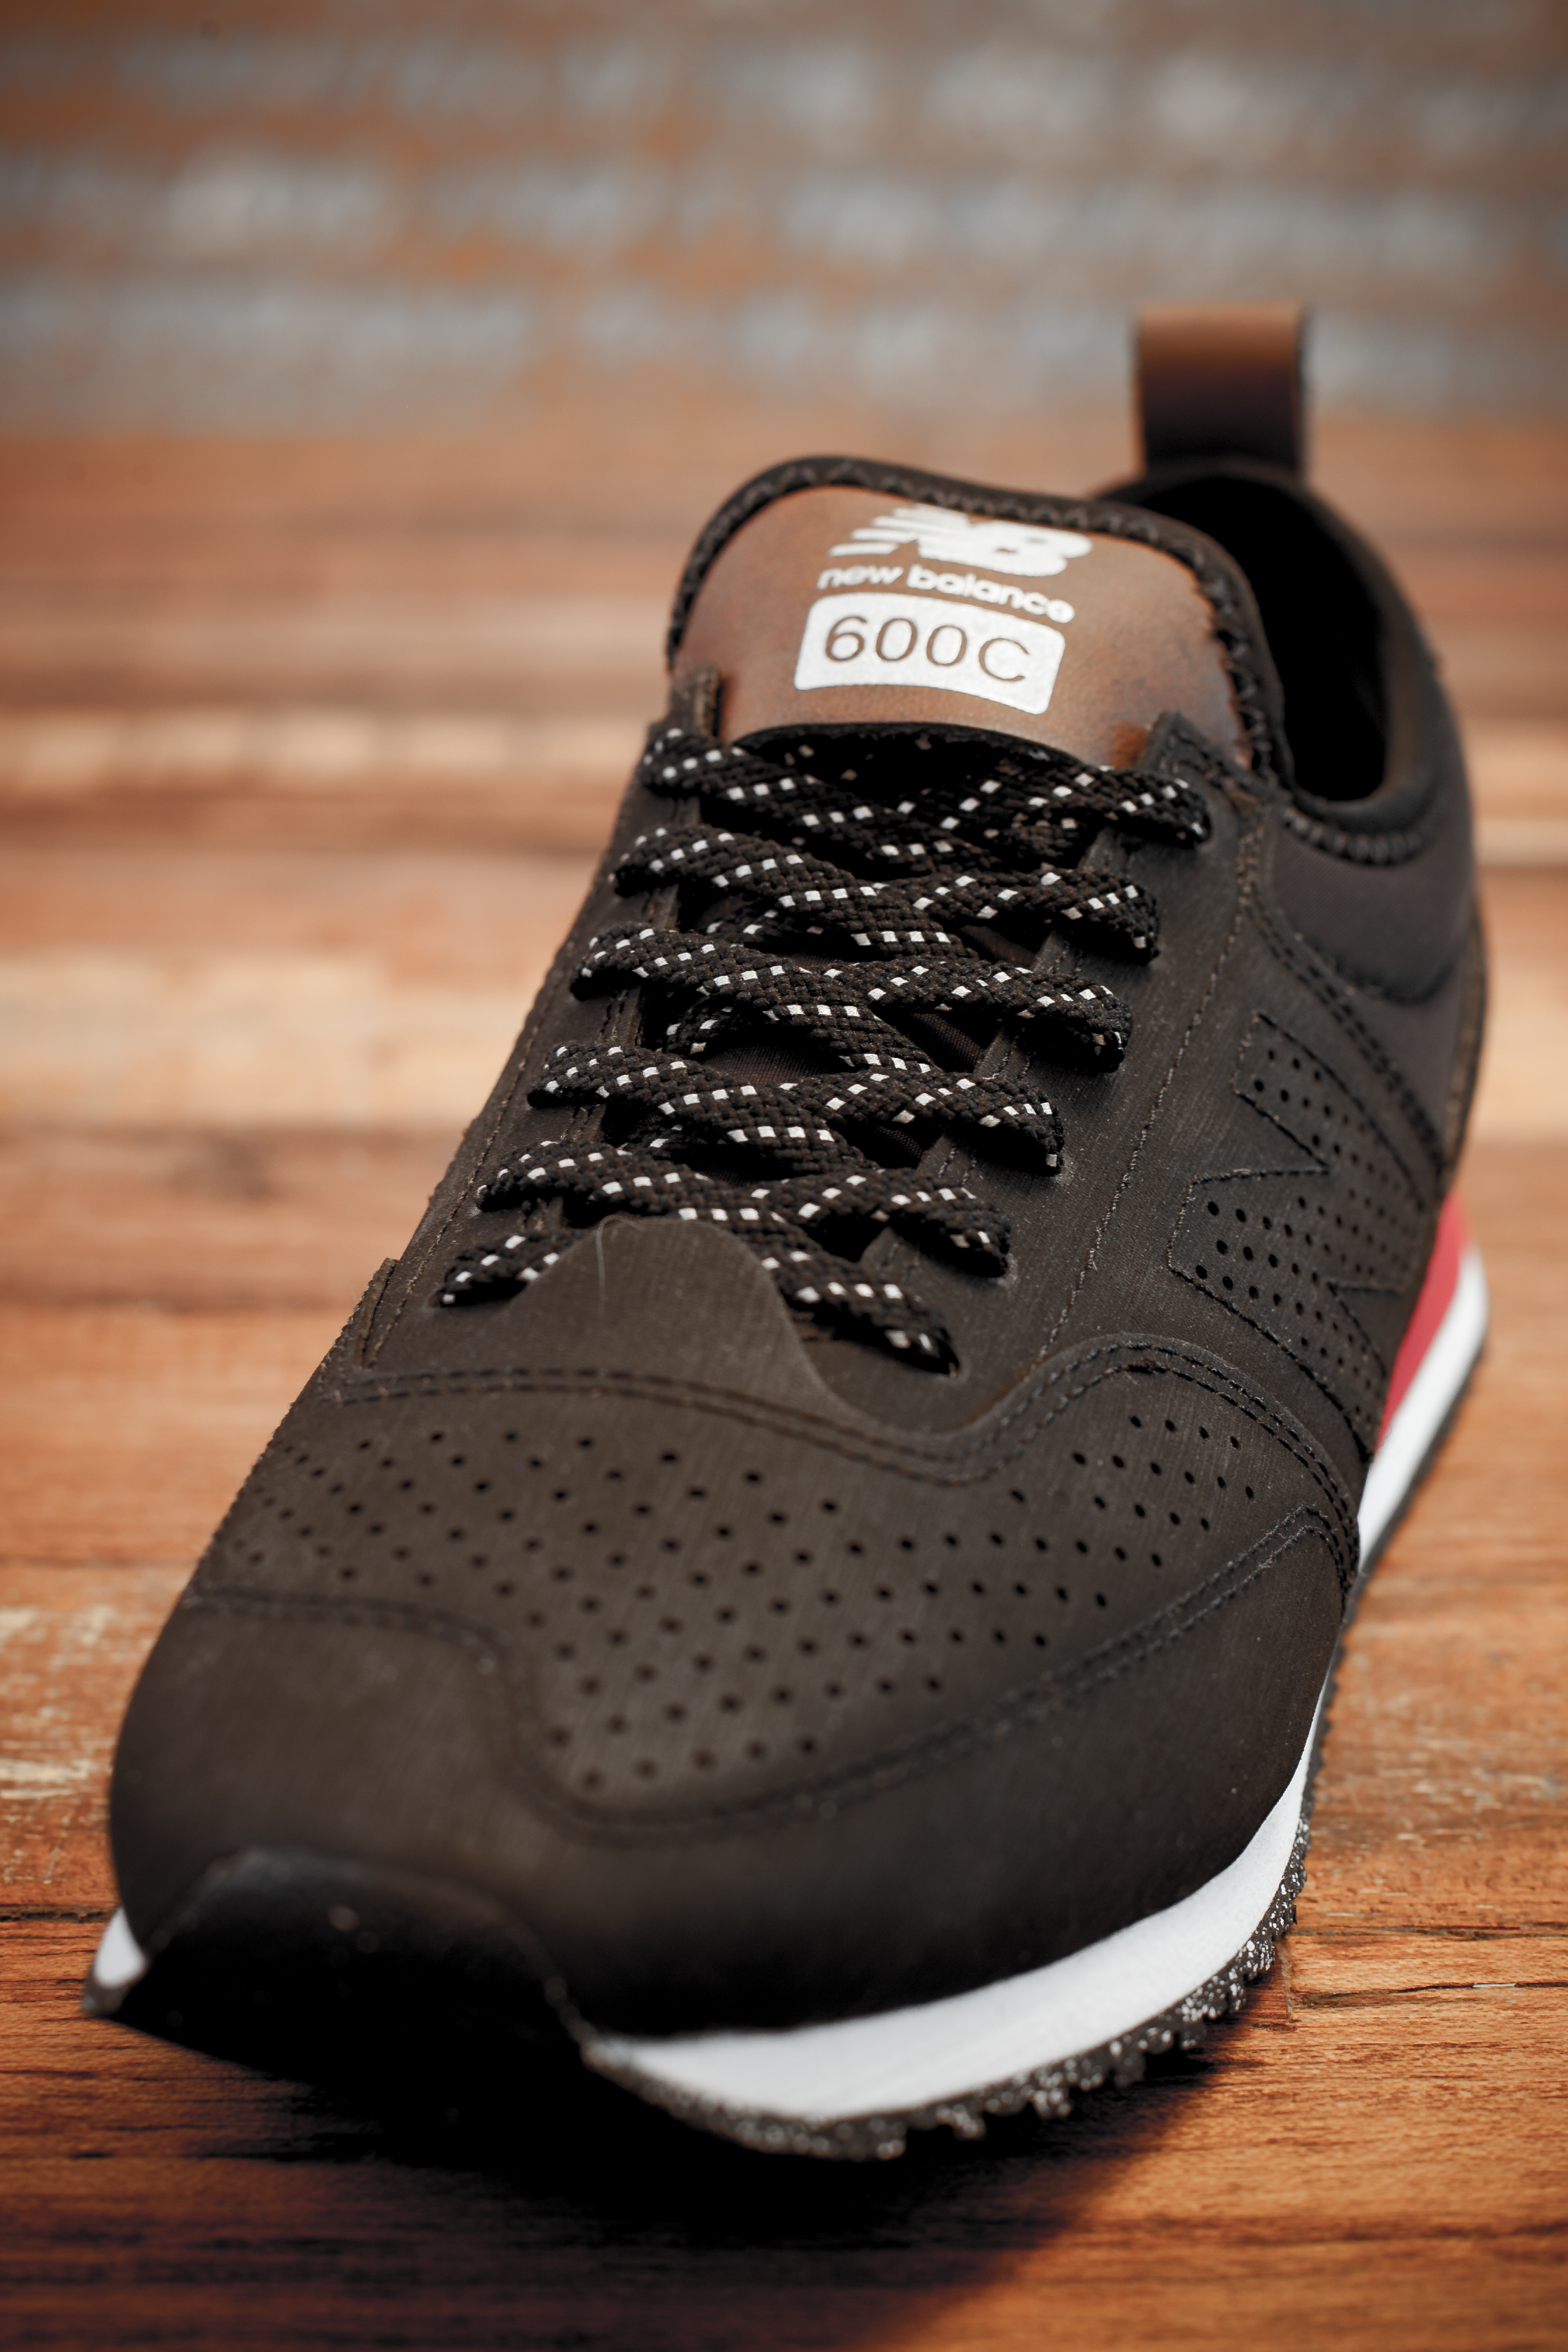 New Balance 600 C-Series — life is a beautiful detail